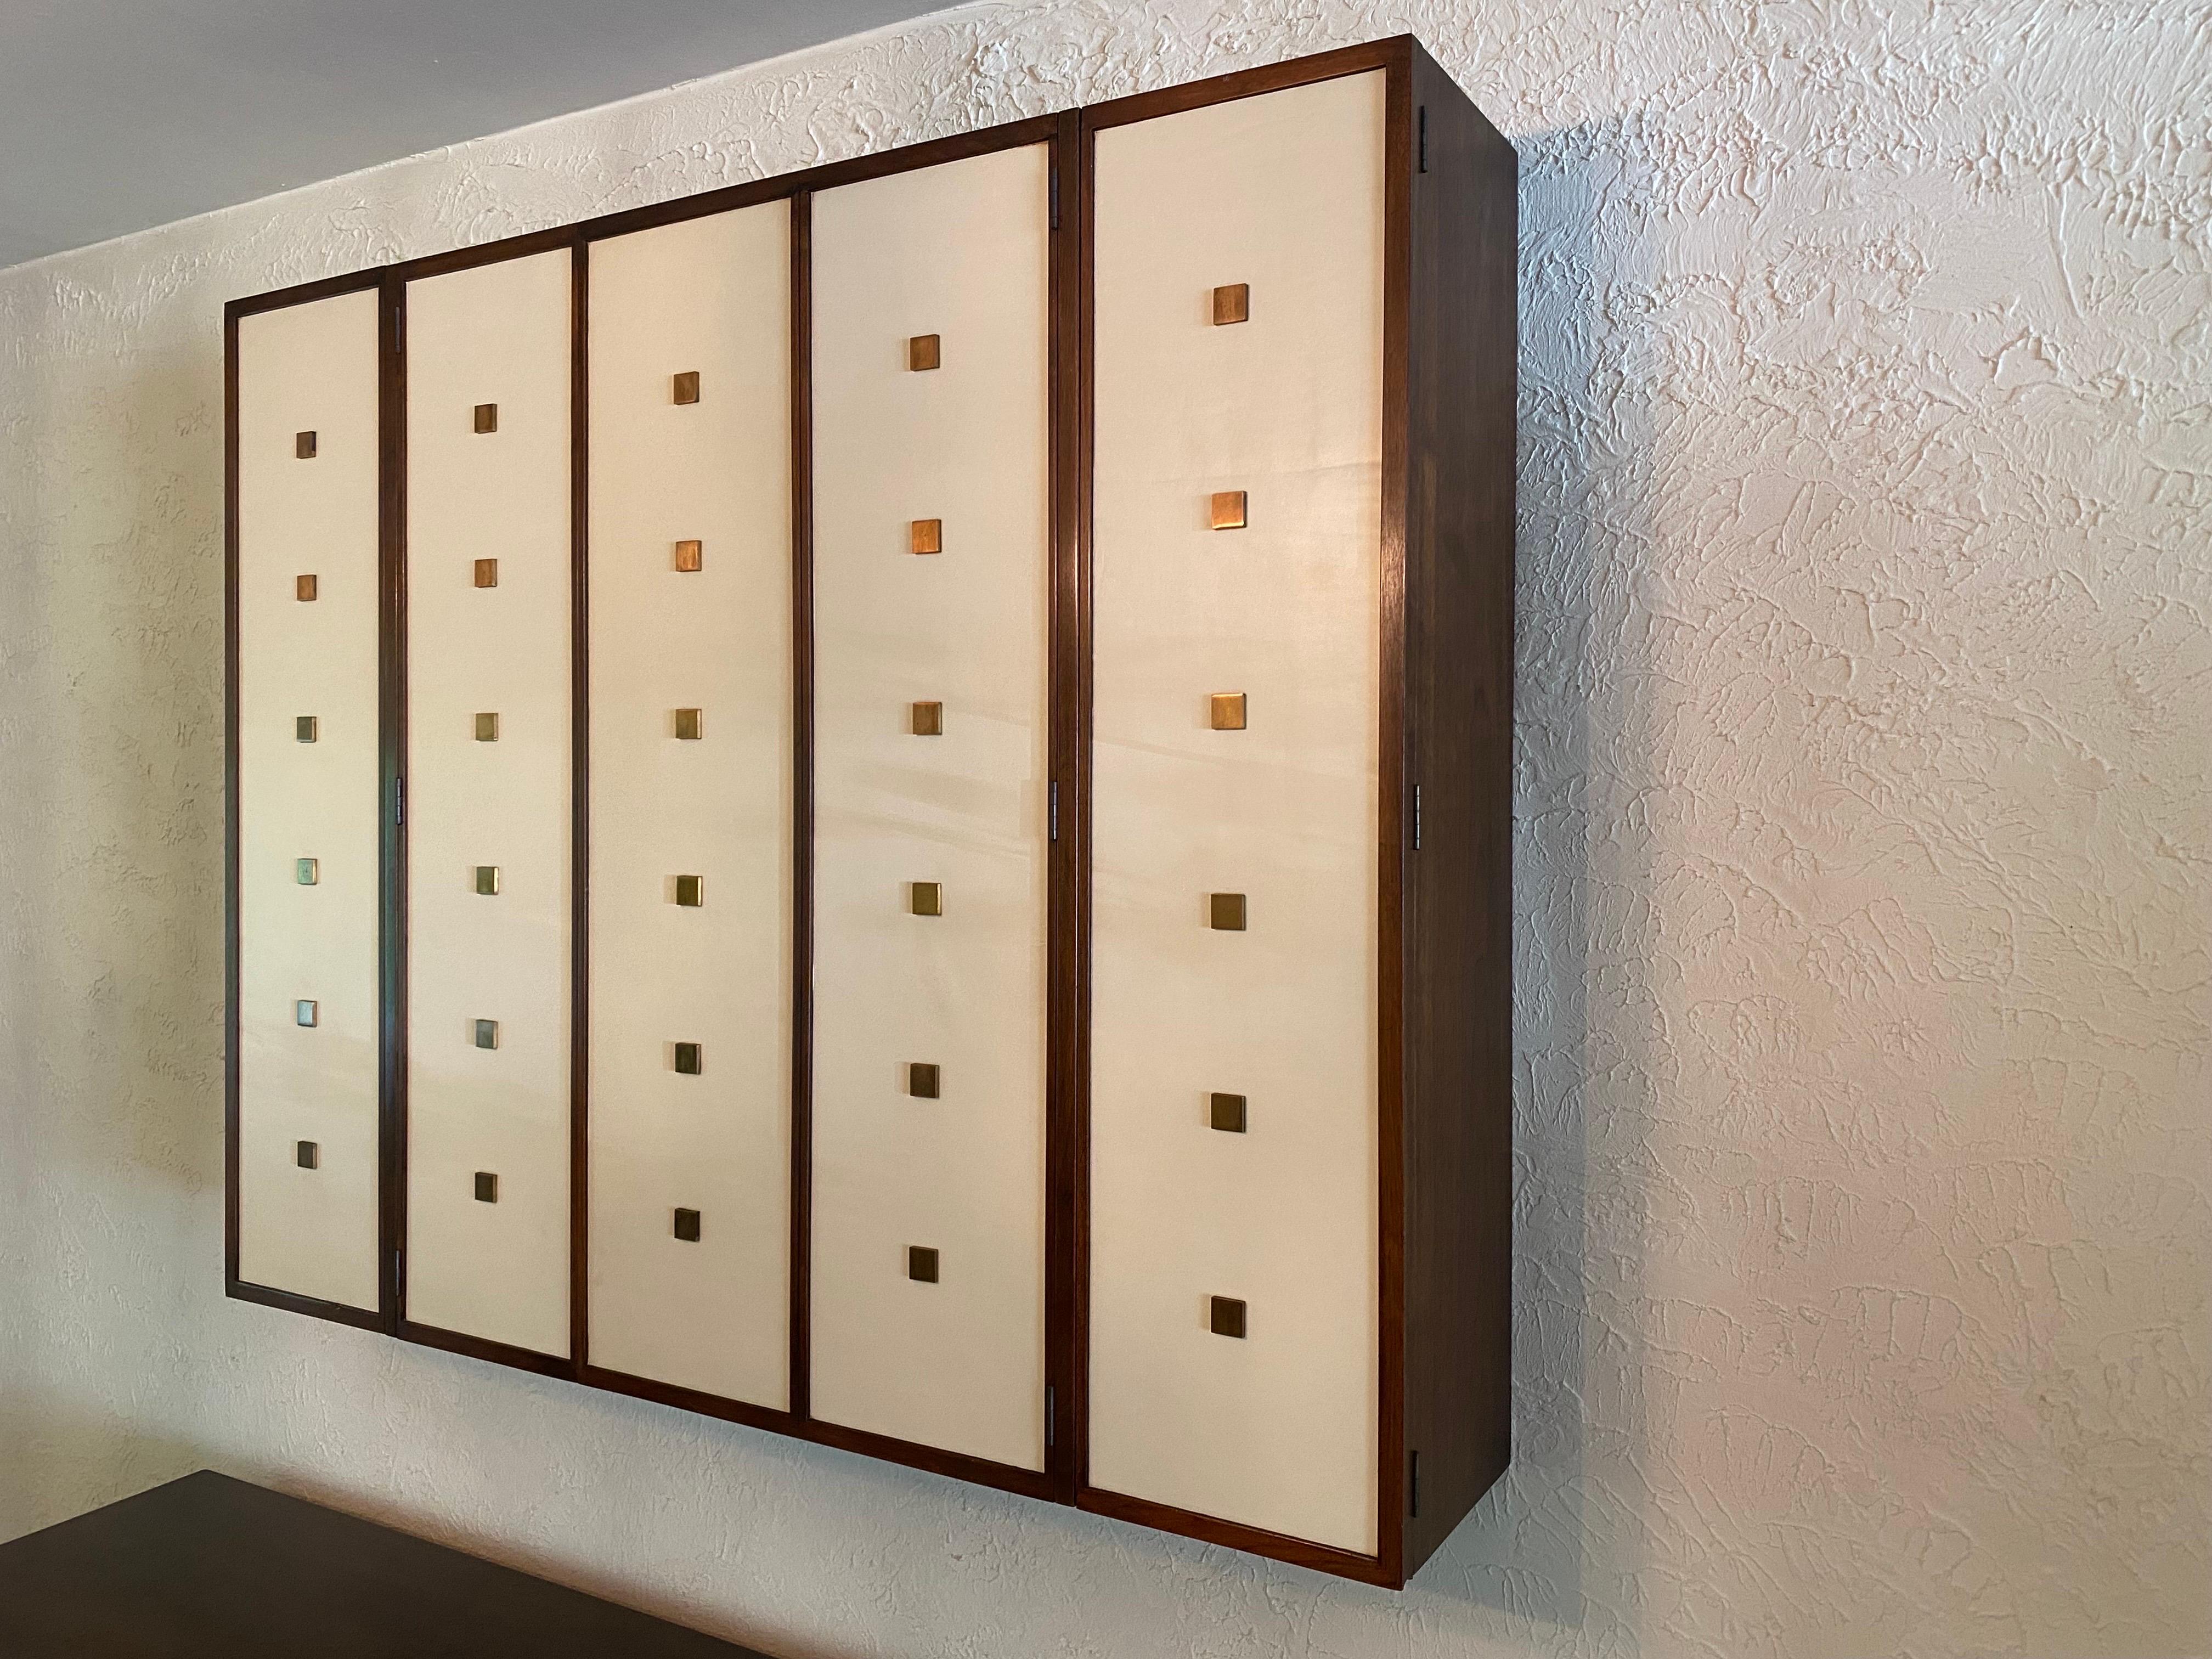 Bert England Hanging Wall Cabinet for Johnson Furniture Company of Grand Rapids Michigan.  Simple and Elegant!  Walnut body with vinyl covered doors and square bullets.  Perfect for Stemware or as a back bar!  Adjustable shelves throughout! 